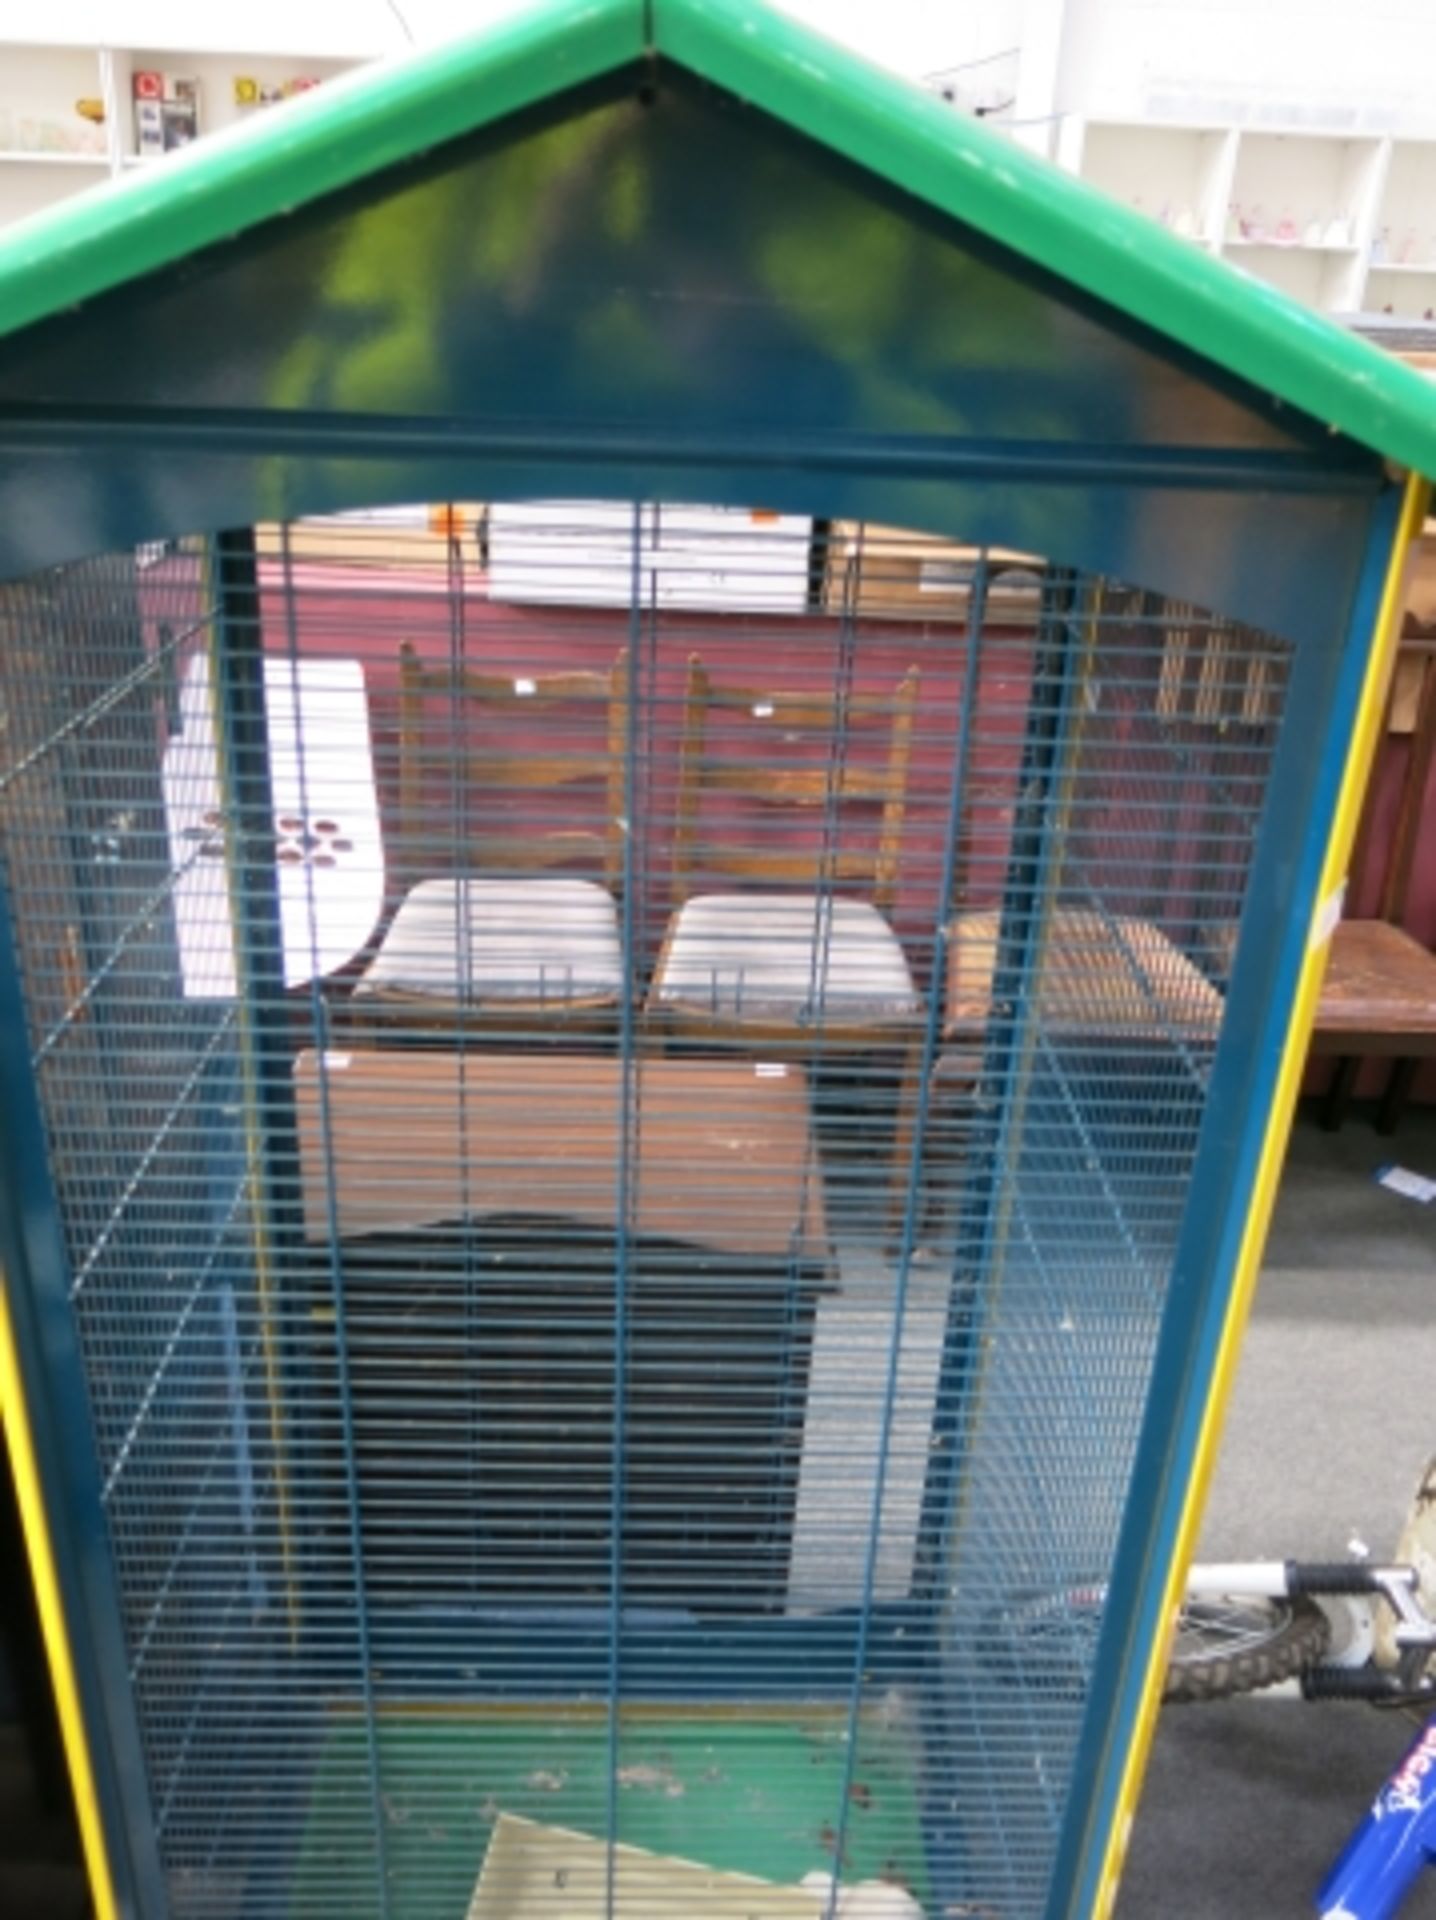 A Ferplast bird aviary in green and yellow metal with some accessories (H160cm, W74cm, D61cm) on - Image 2 of 3